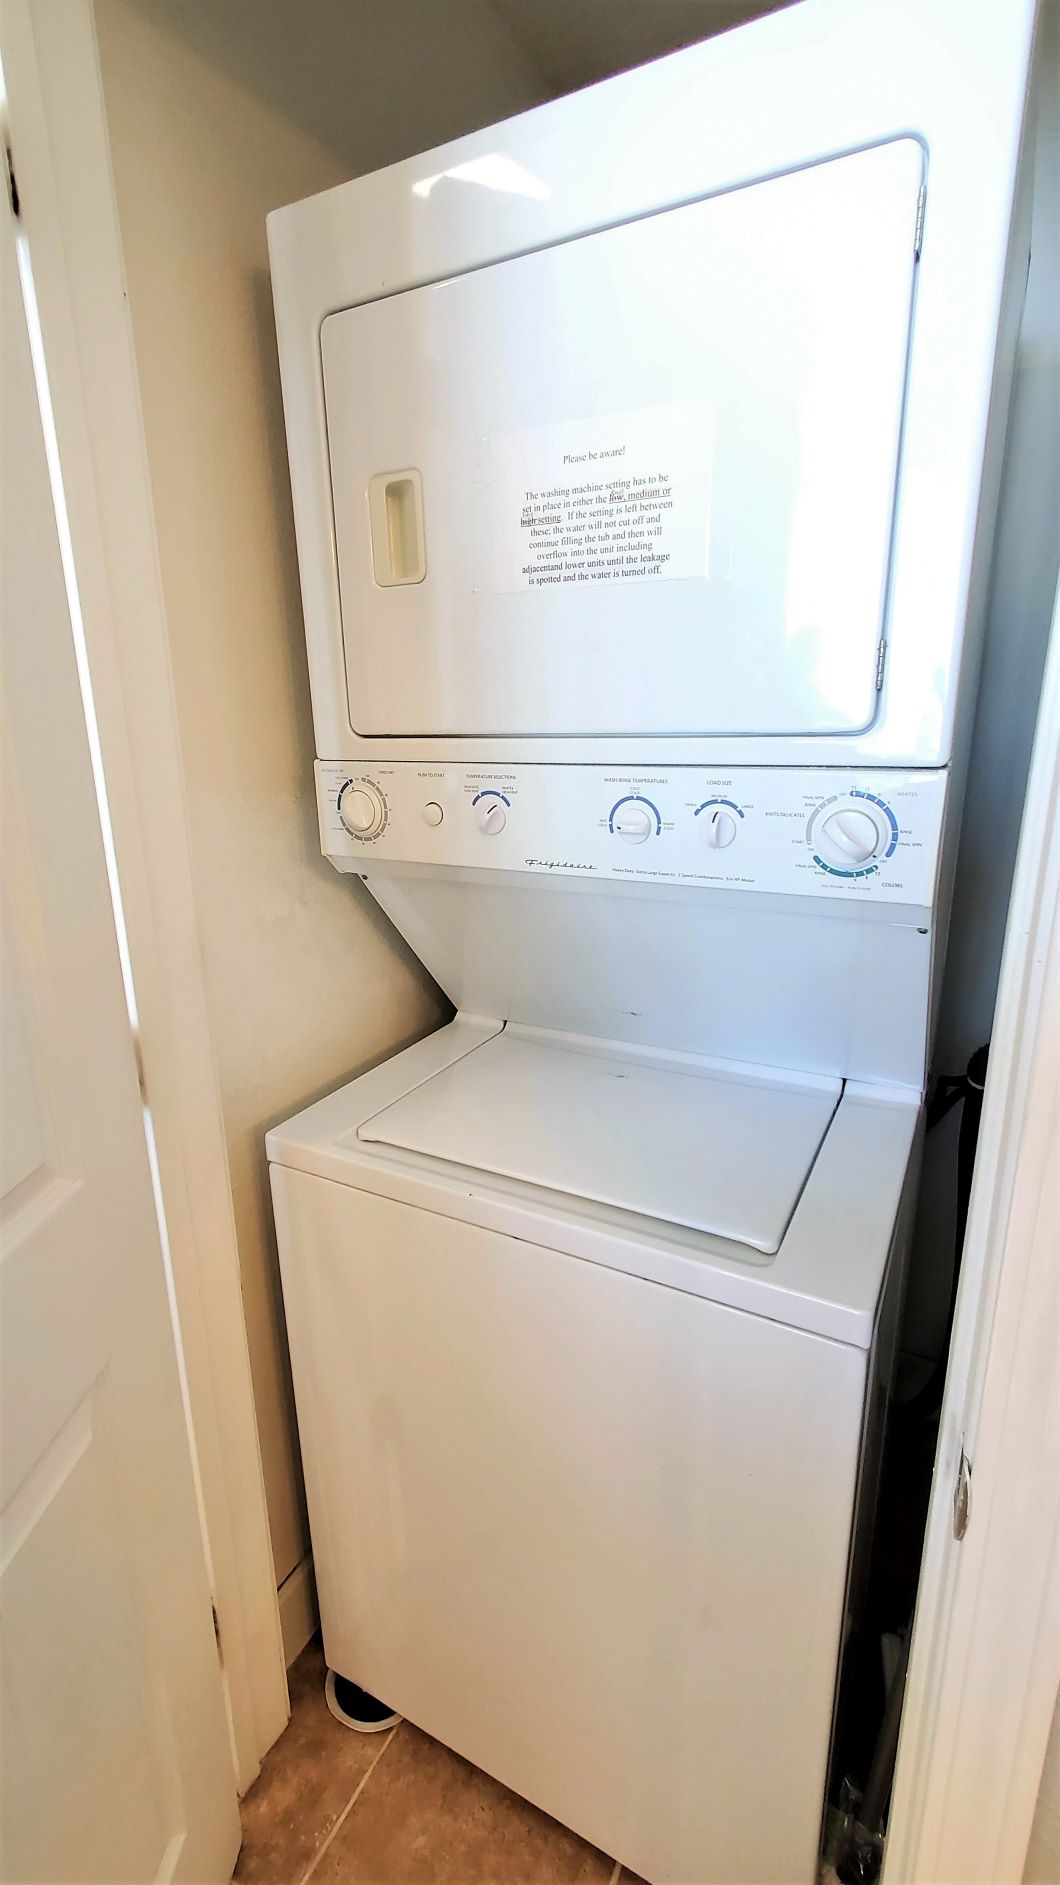 Unit 2007 Washer and Dryer